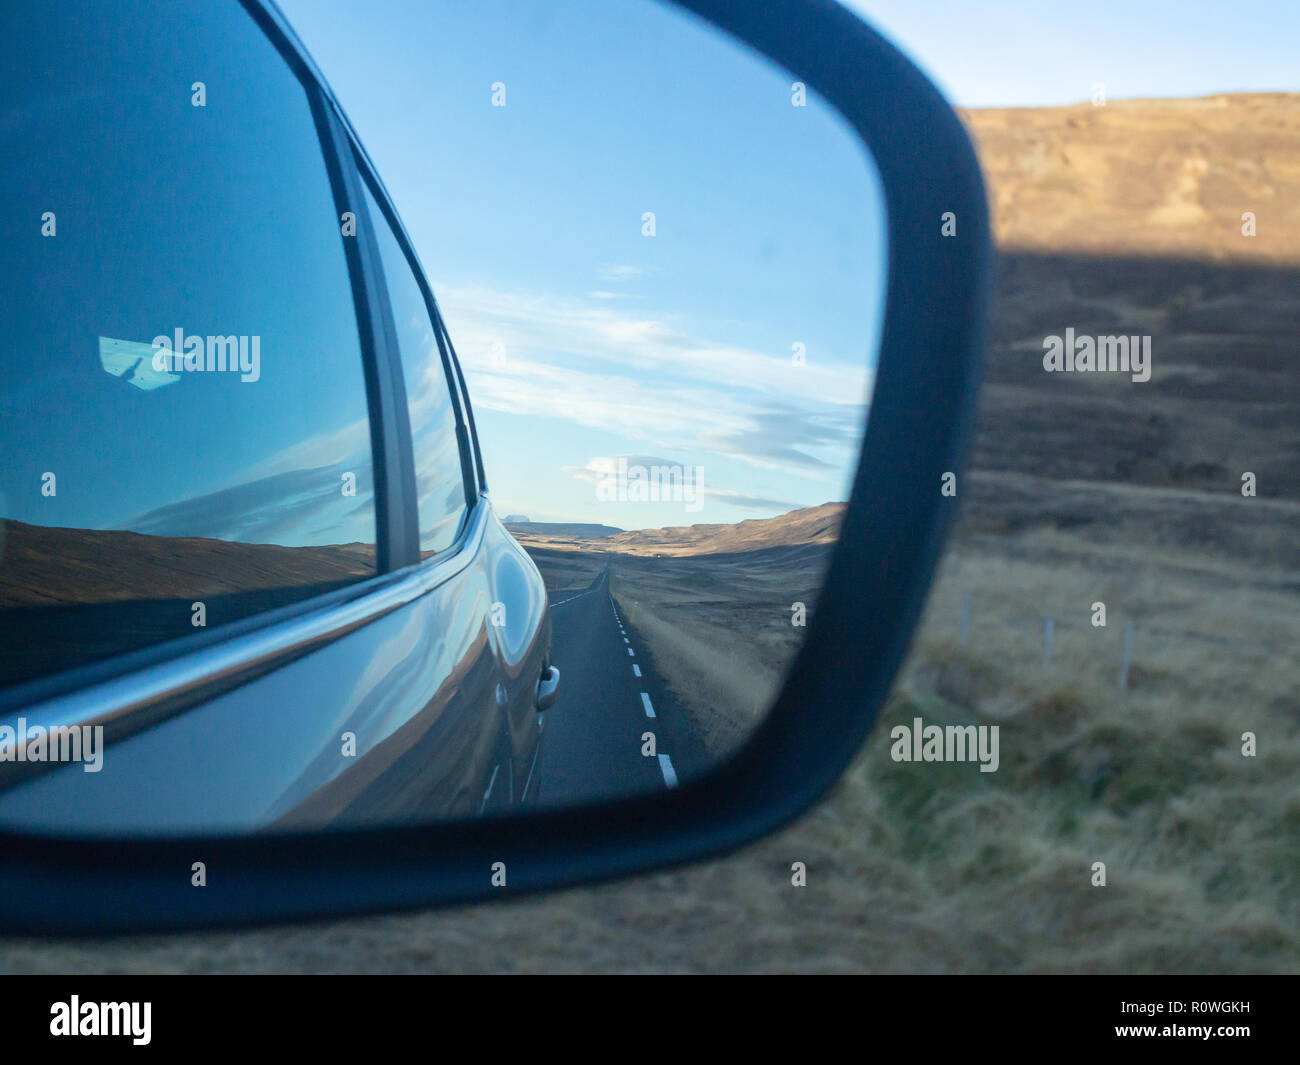 Iceland route one road in the car mirror rear view Stock Photo